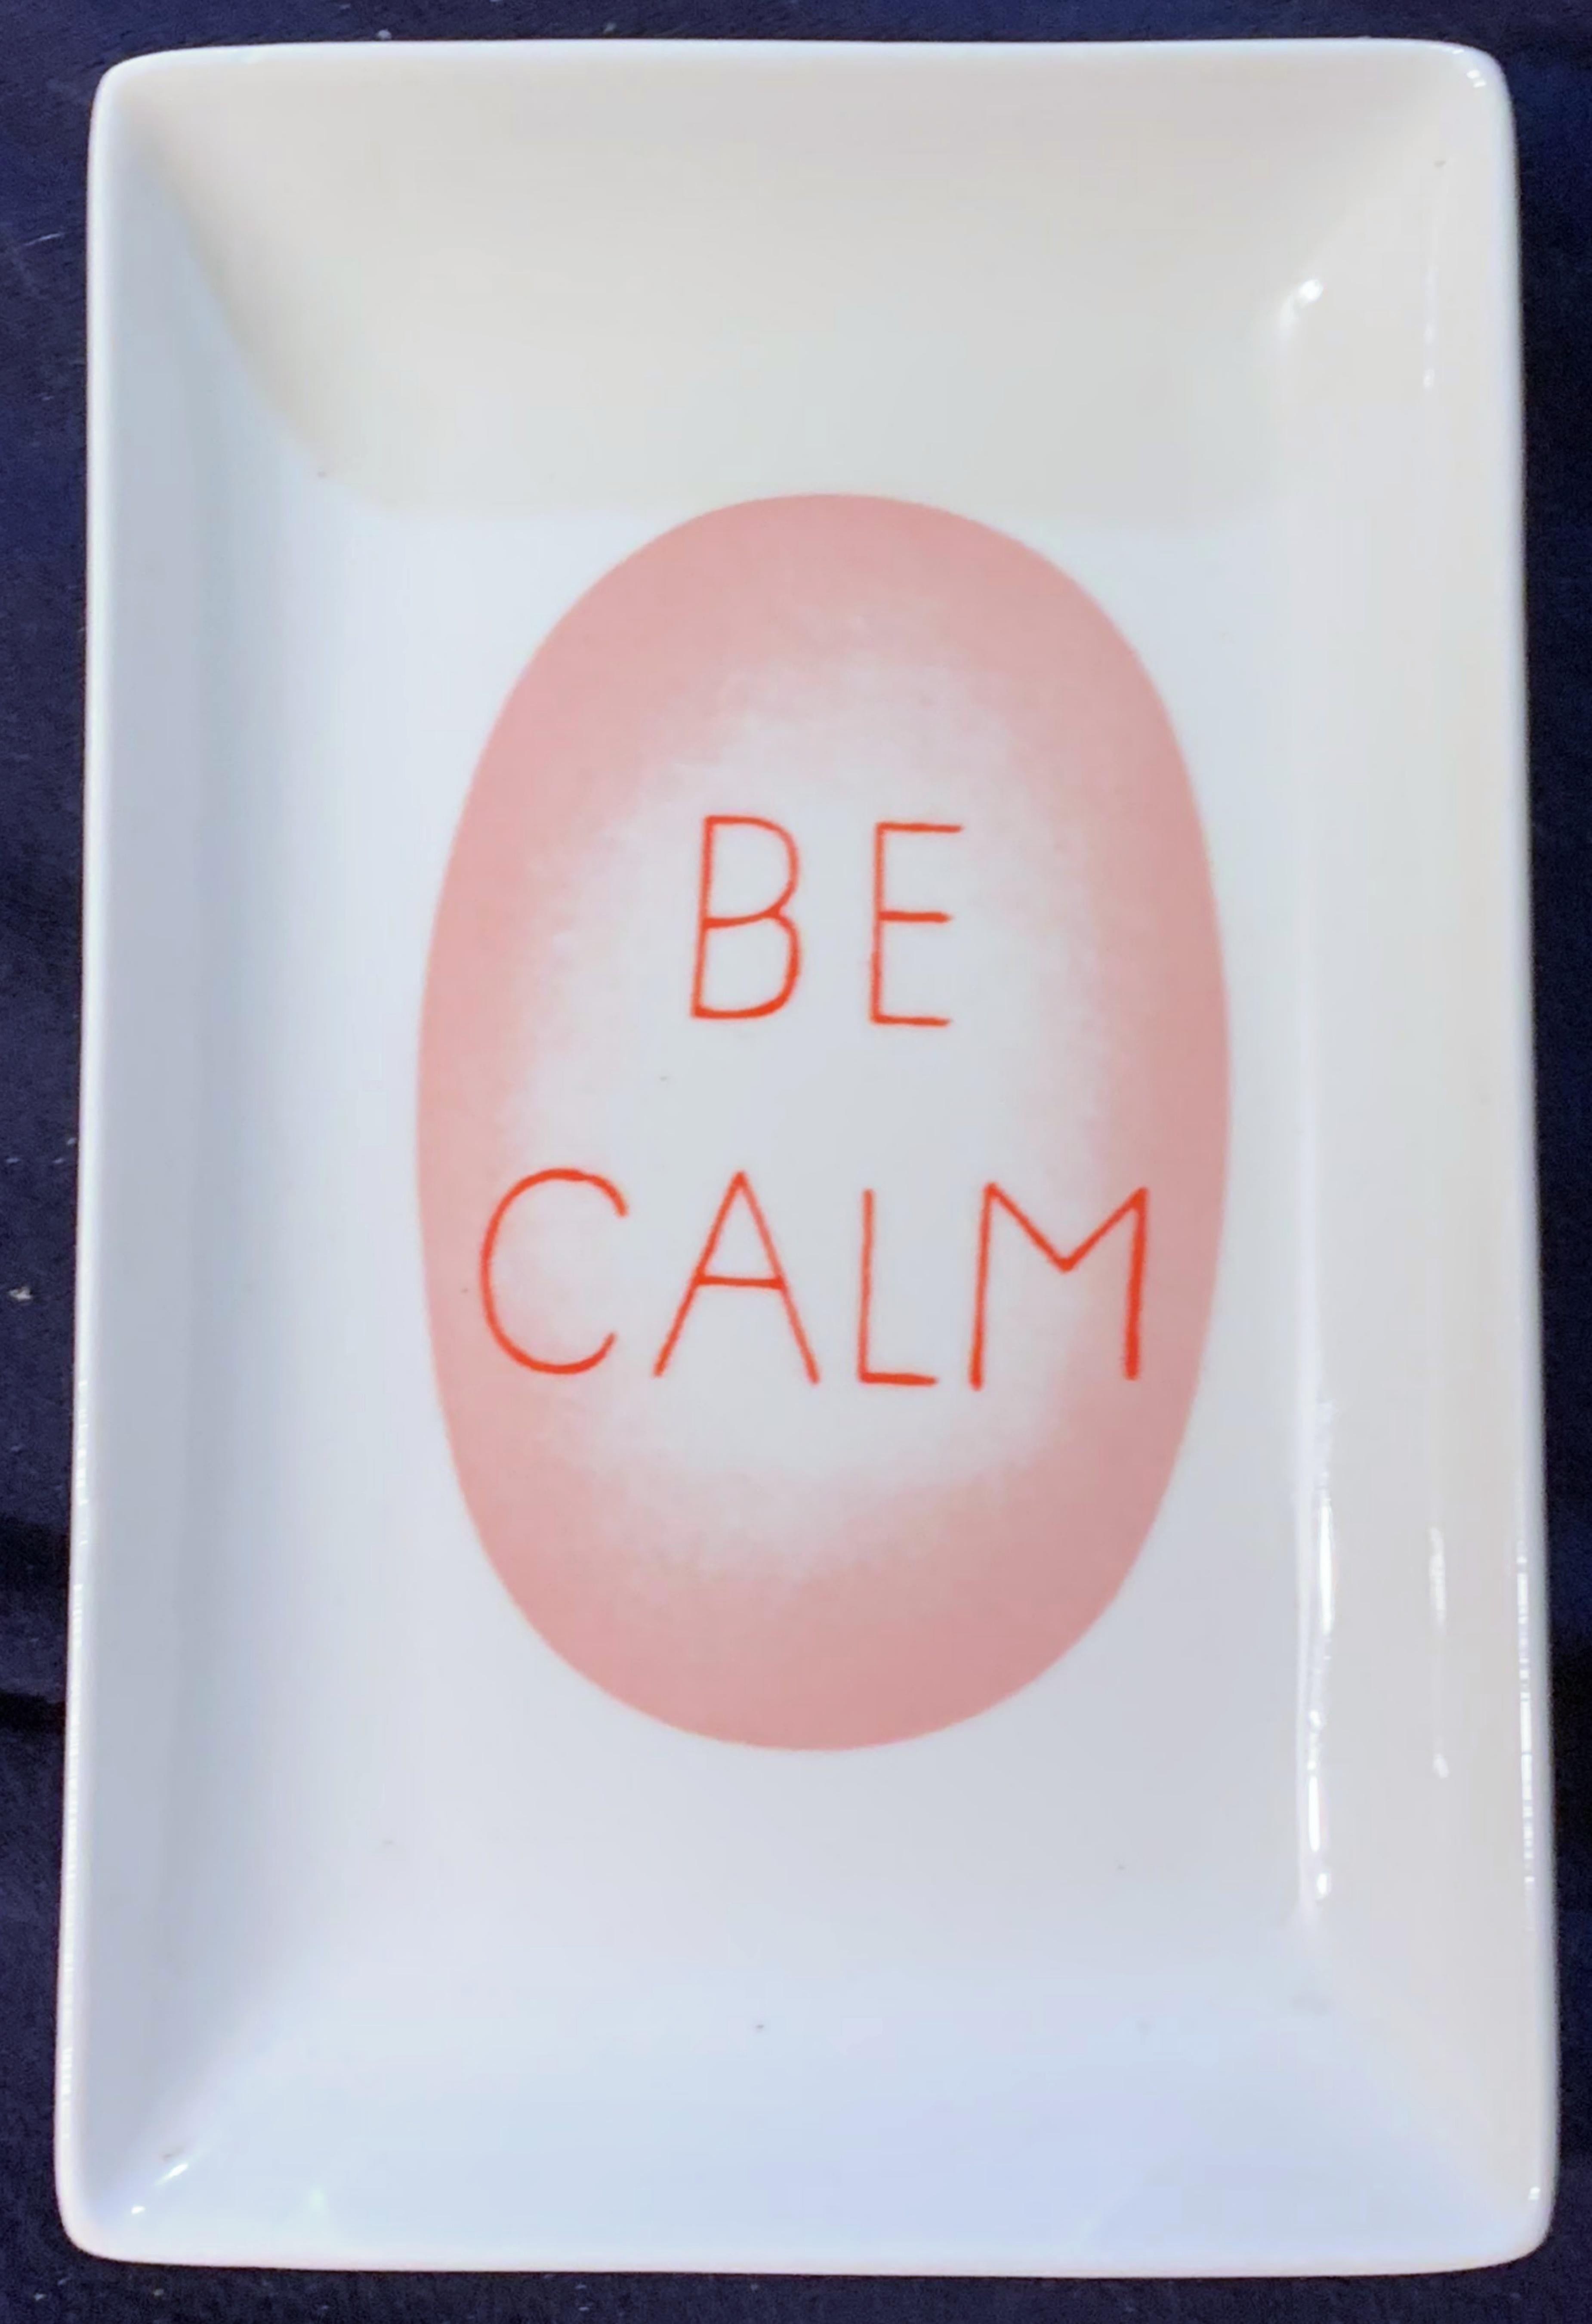 be calm louise bourgeois